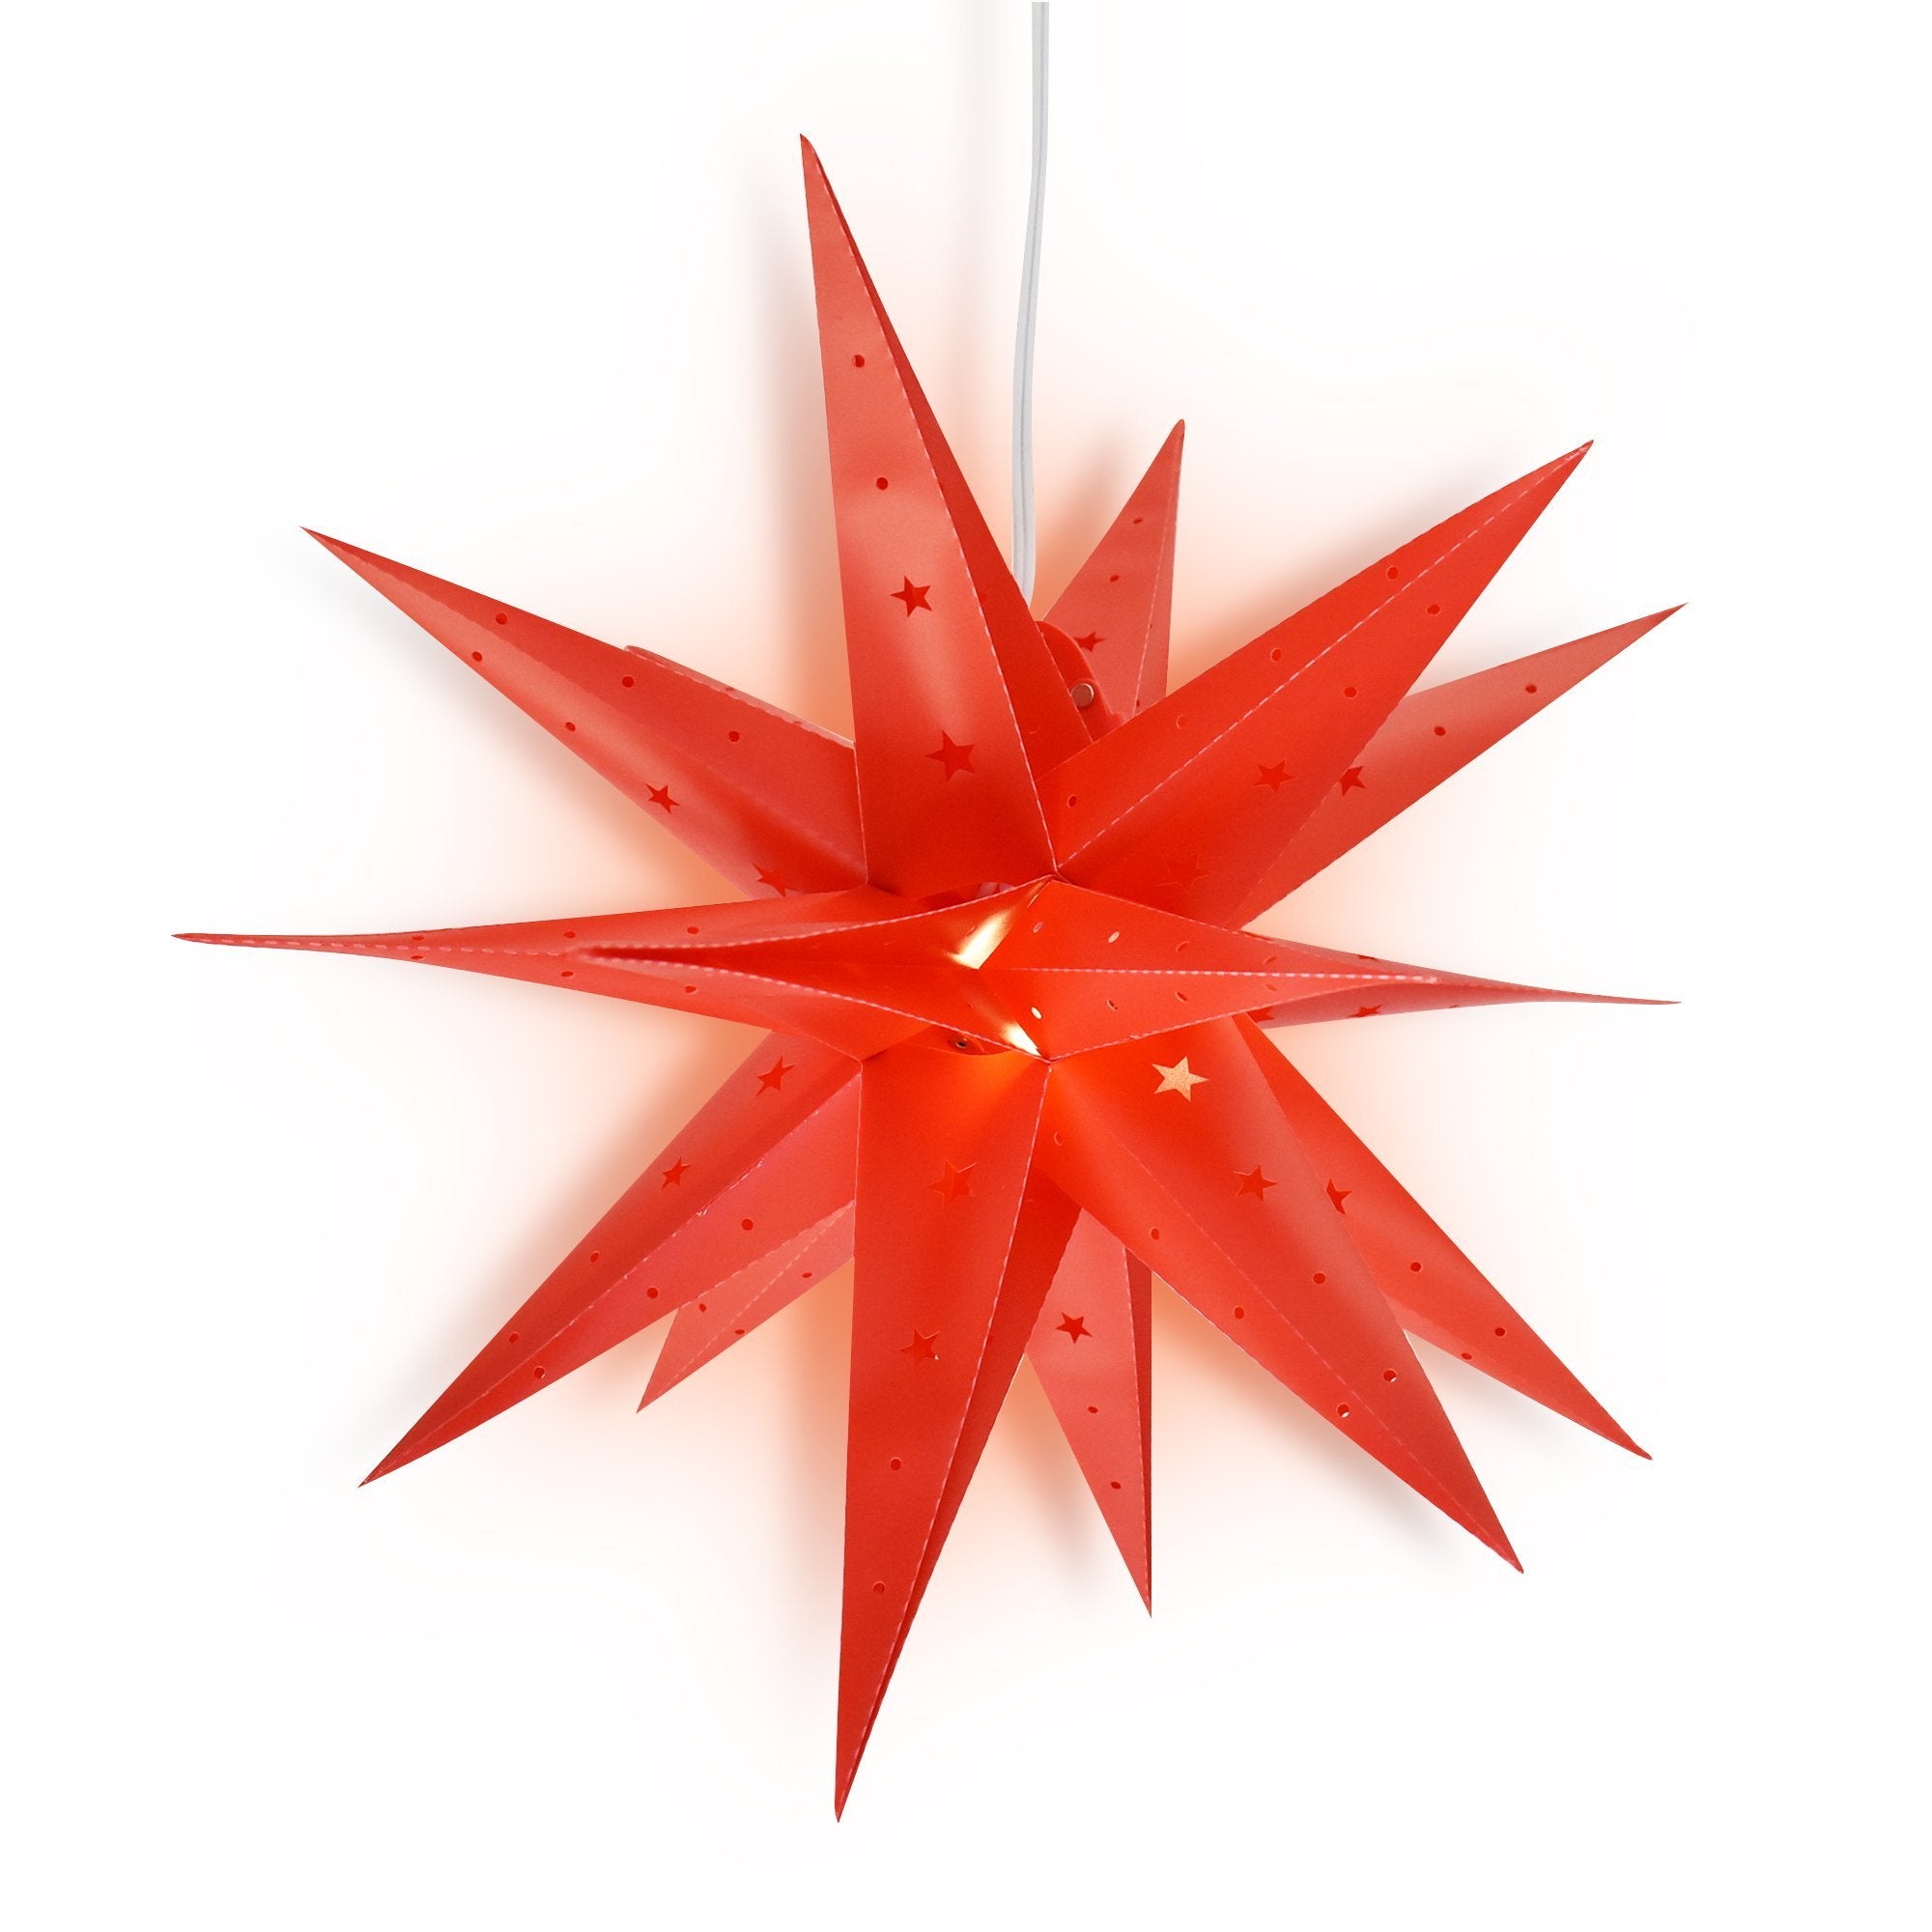 23" Red Moravian Weatherproof Star Lantern Lamp, Multi-Point Hanging Decoration (Shade Only)